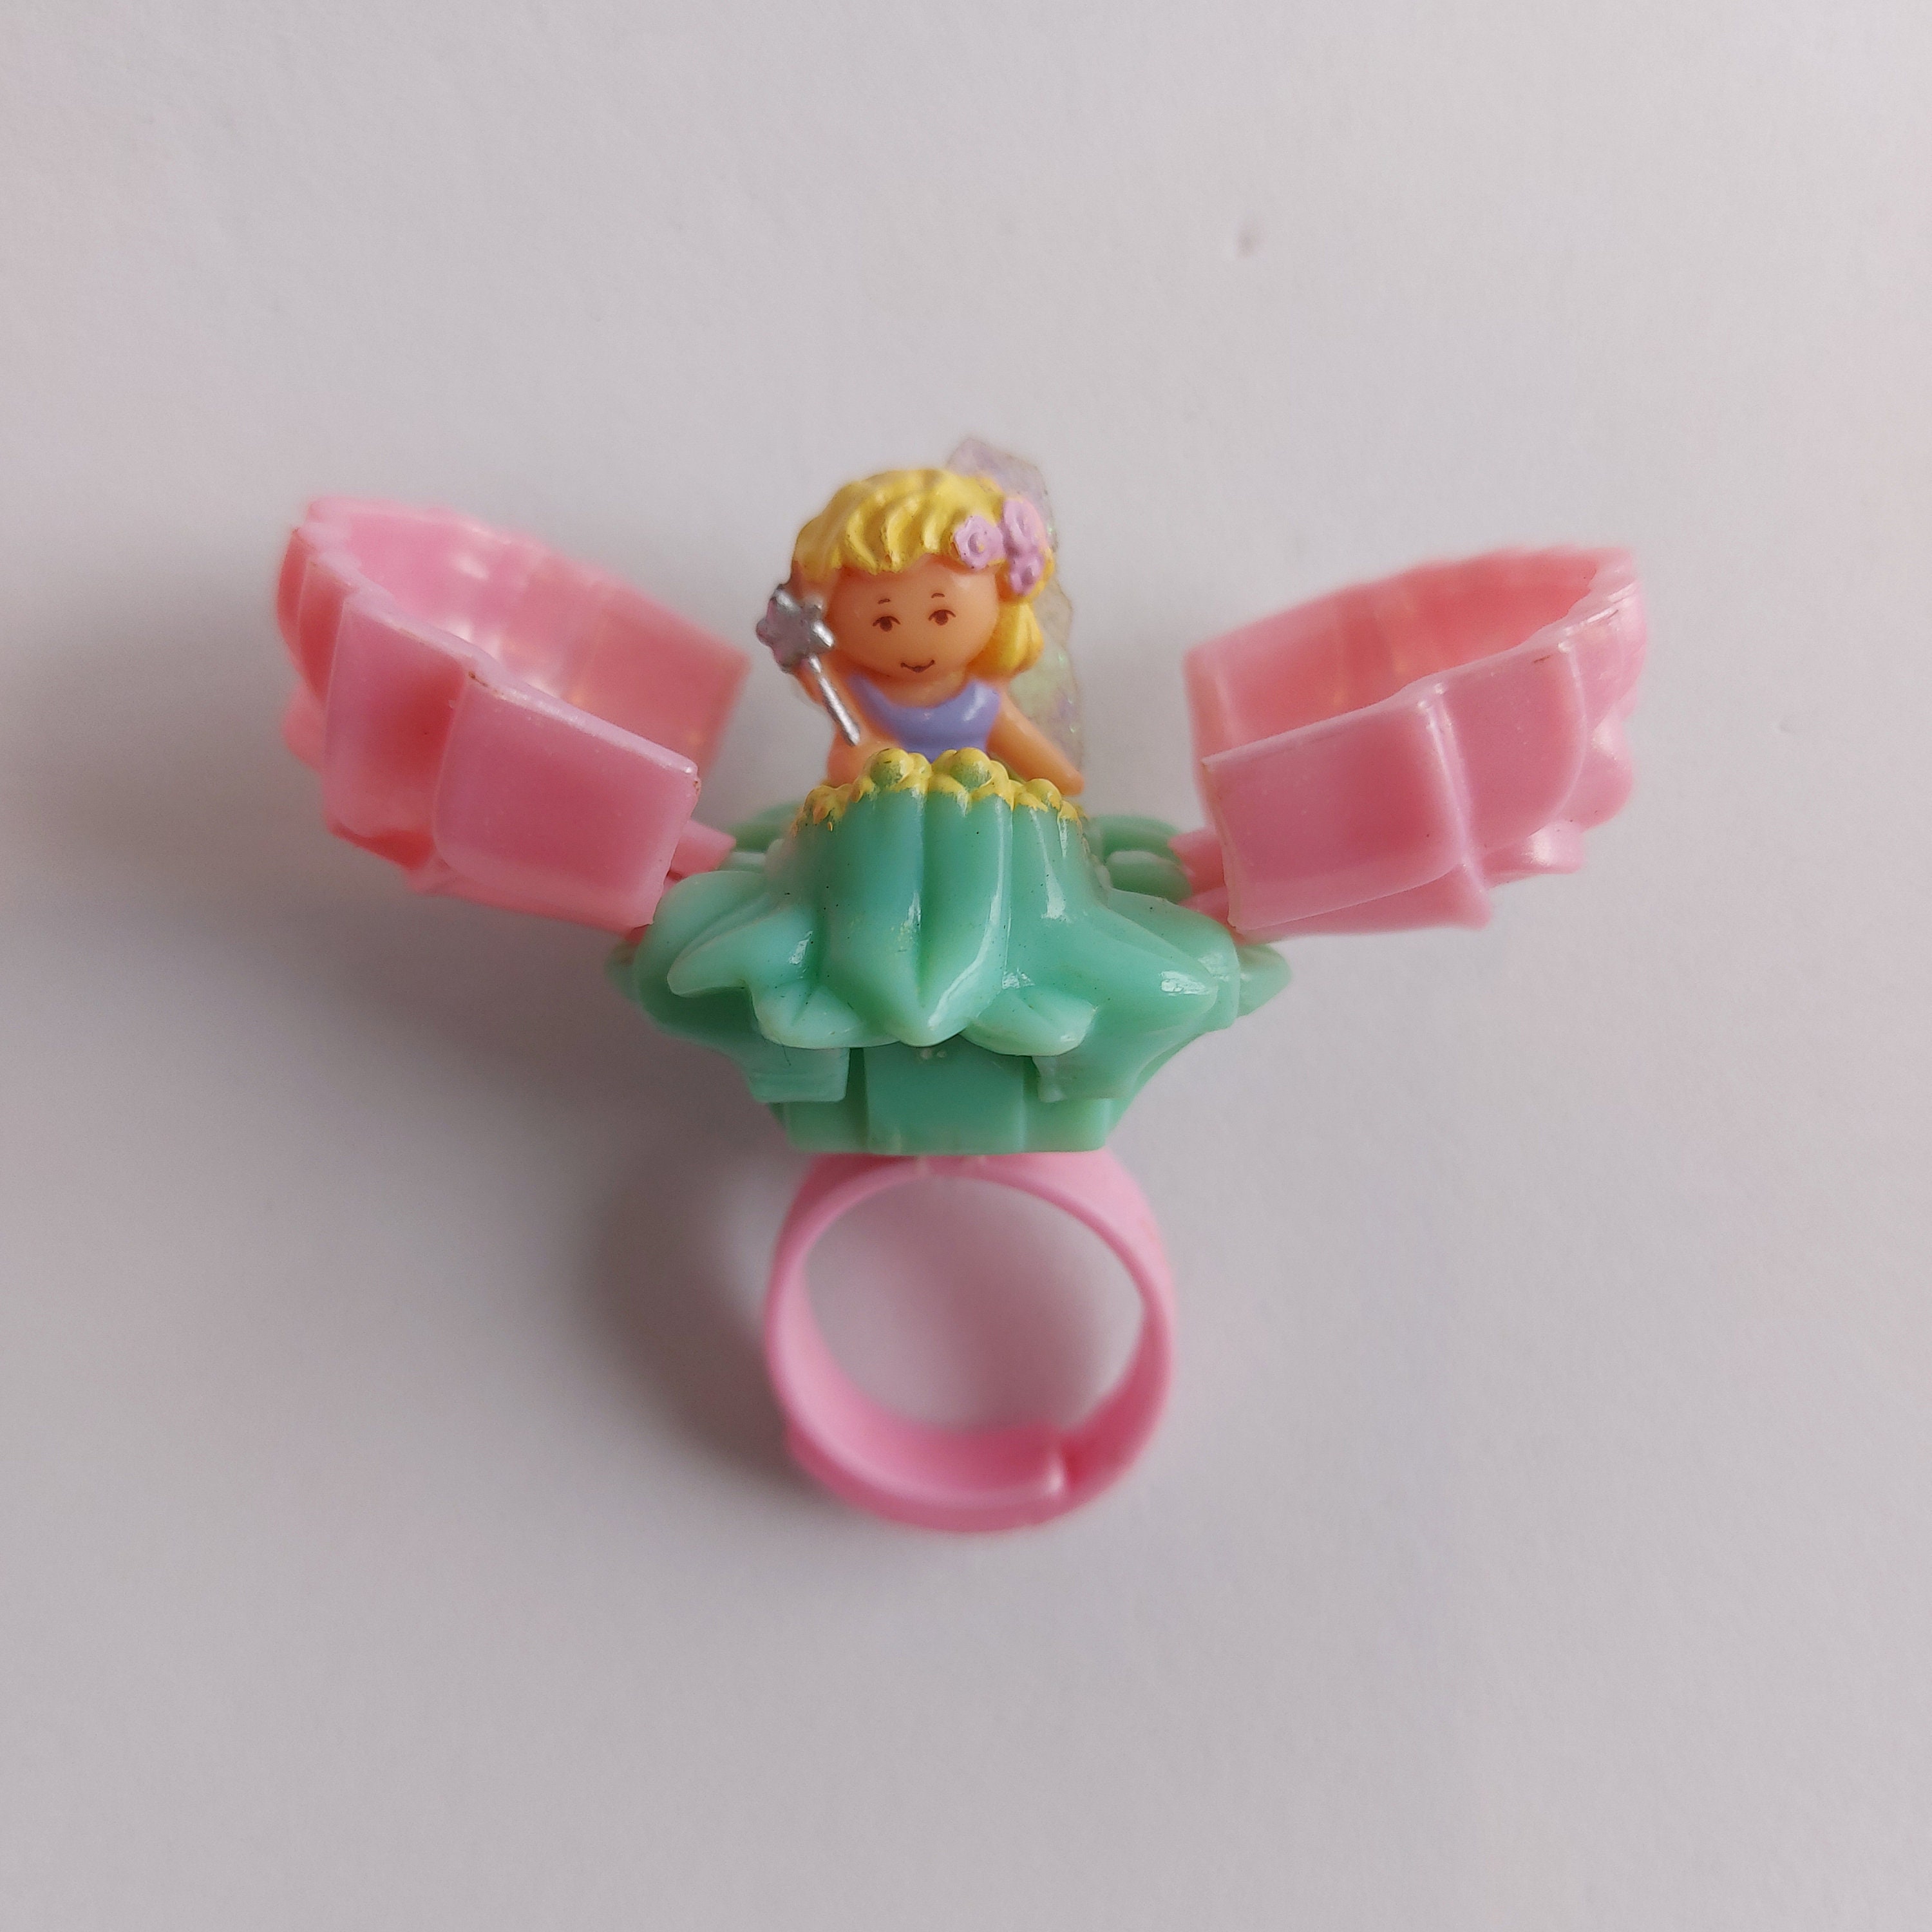 Rare-complete Vintage Polly Pocket Ring Fairy in Pink bluebird Compact- polly's Ring Polly Pocket Secret Rose Fairy Ring 1993 